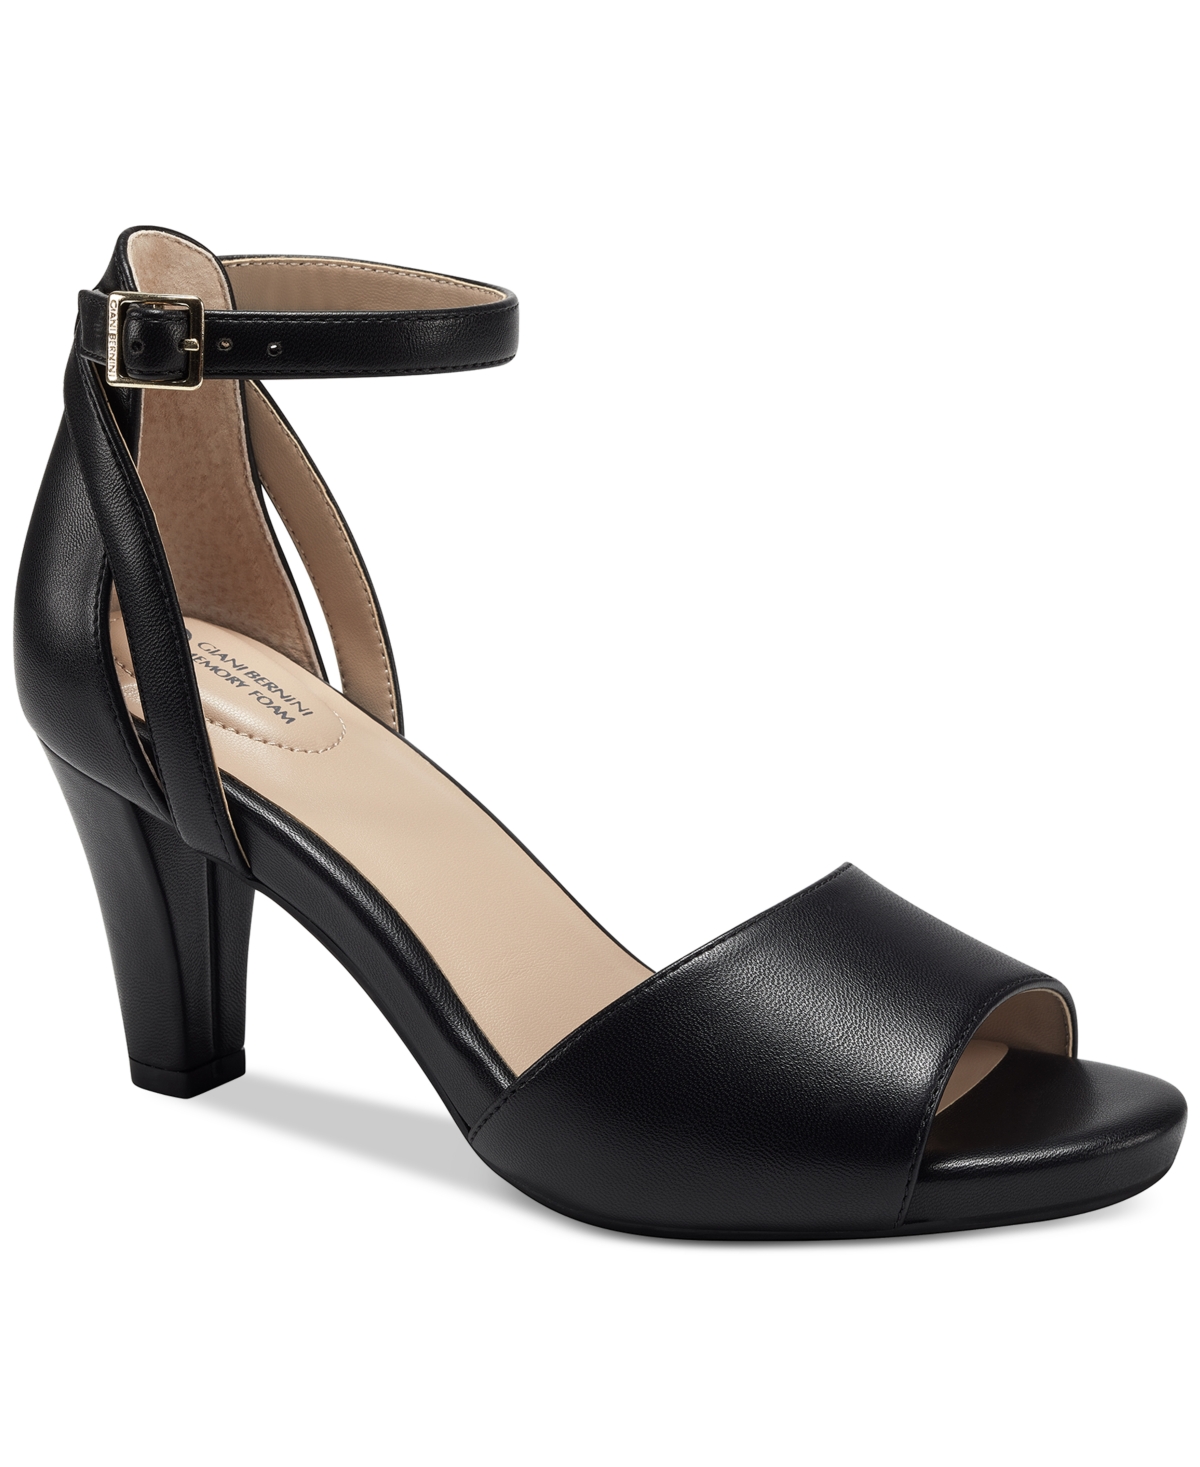 Clarrice Ankle-Strap Pumps, Created for Macy's - Black